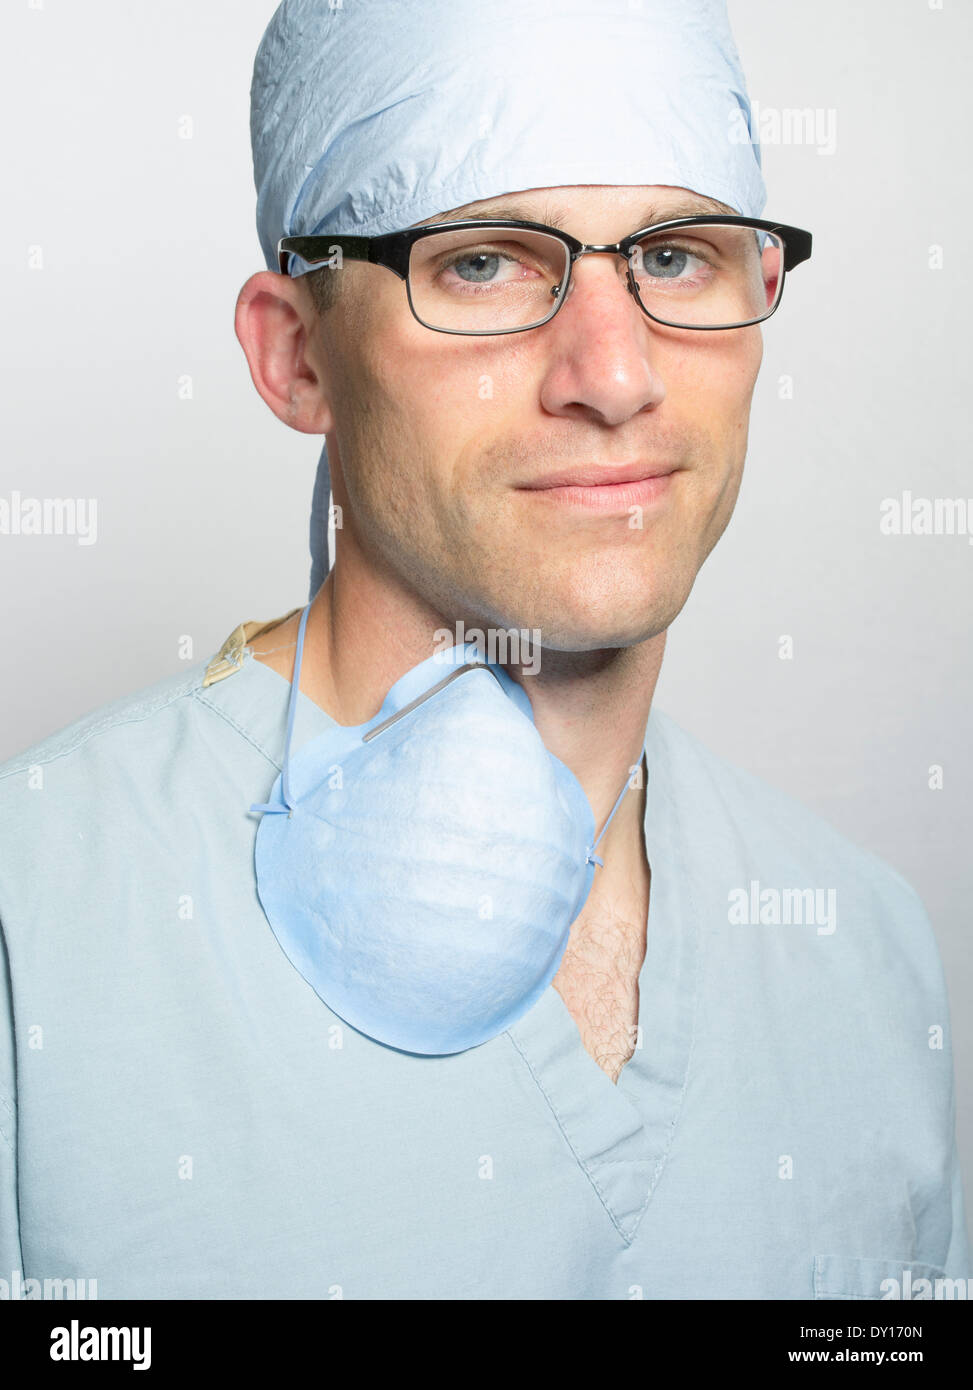 Handsome male medic wearing medical scrubs and glasses. Doctor / Surgeon / Nurse Stock Photo